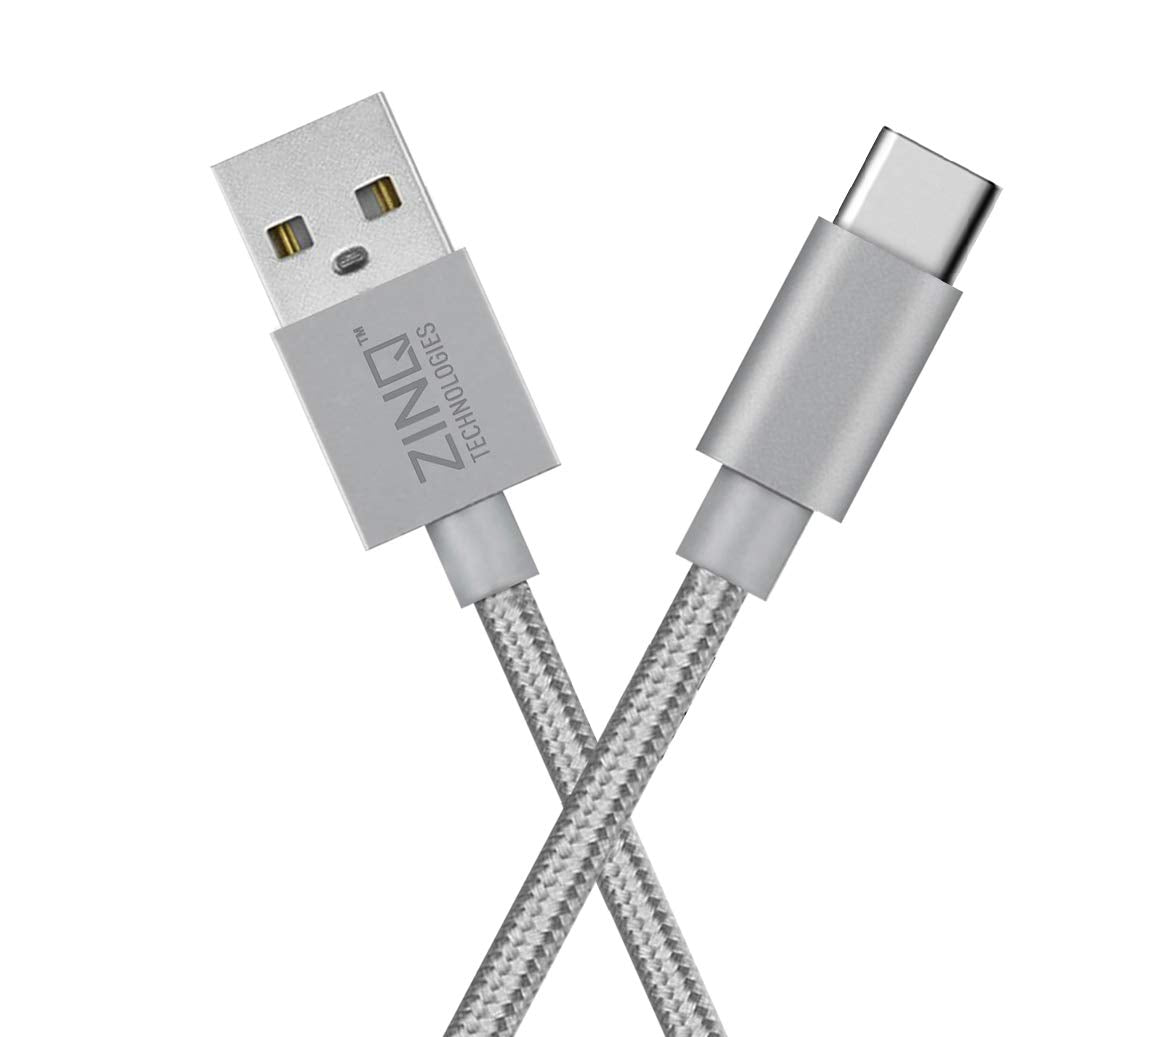 Open Box, Unused Zinq Technologies USB Type C to USB Type A 2.0 Cable Silver Pack of 2